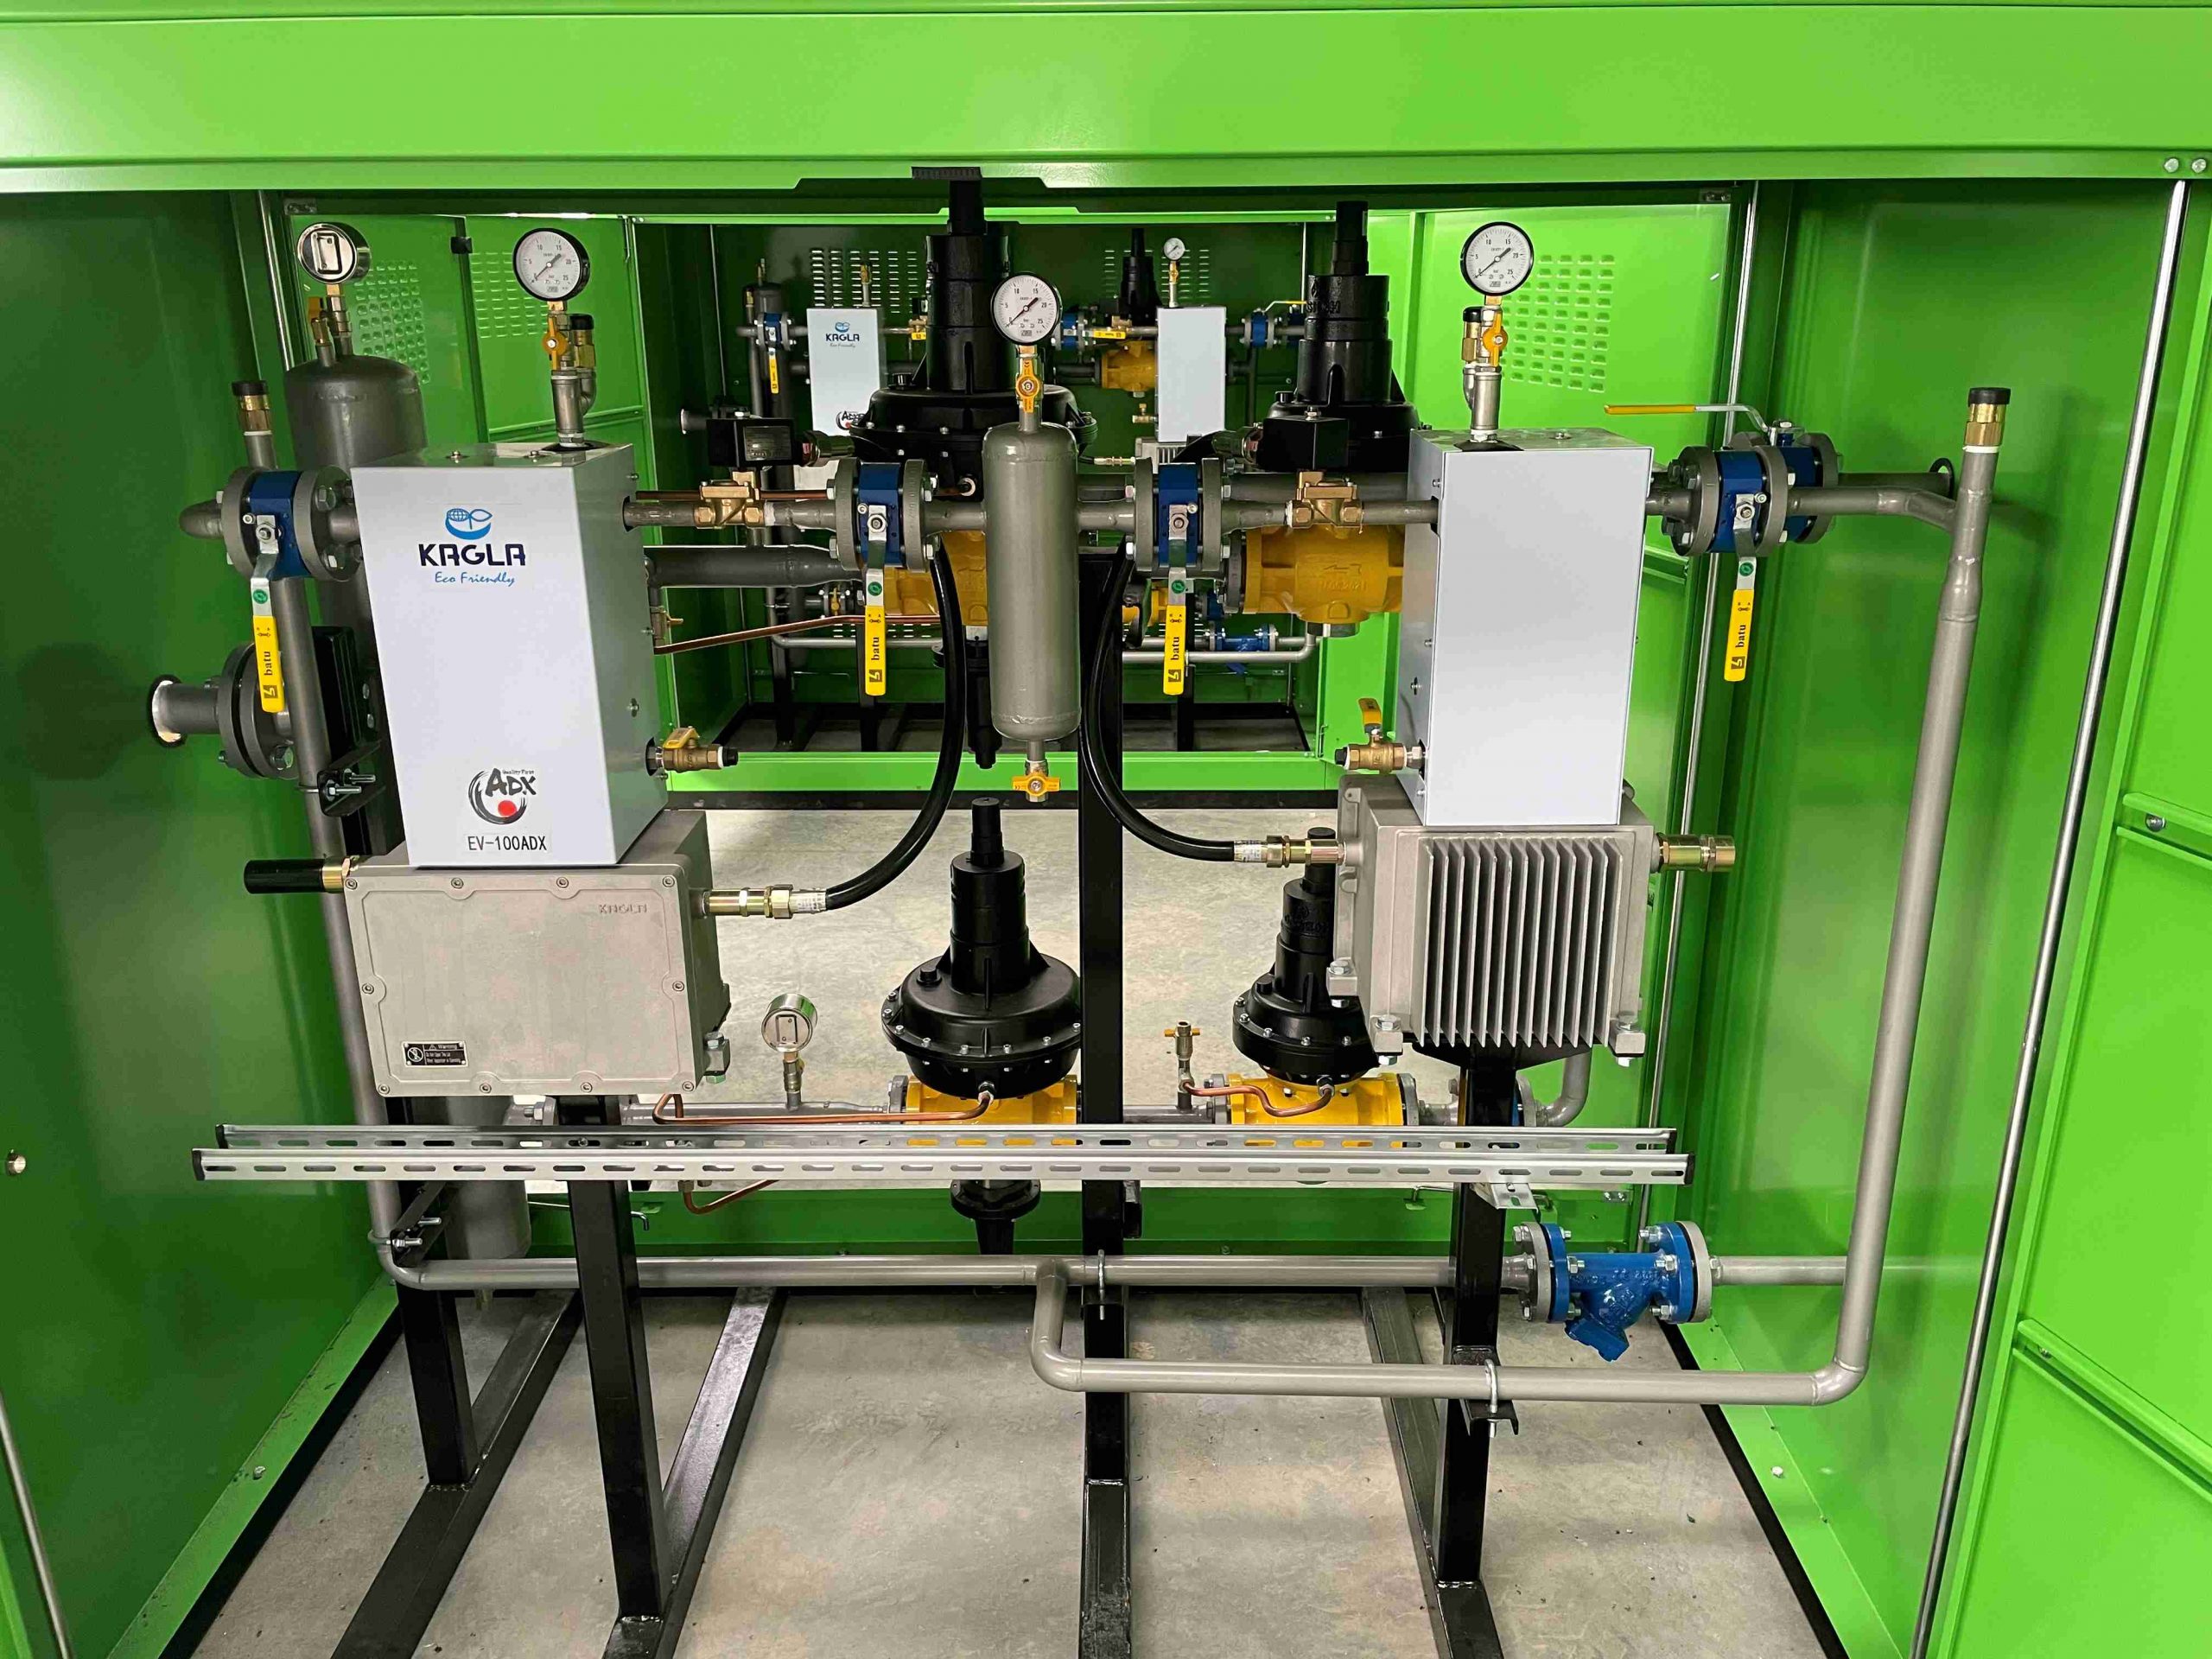 Image-A of ADX 2 units installation for bigger gas consumption